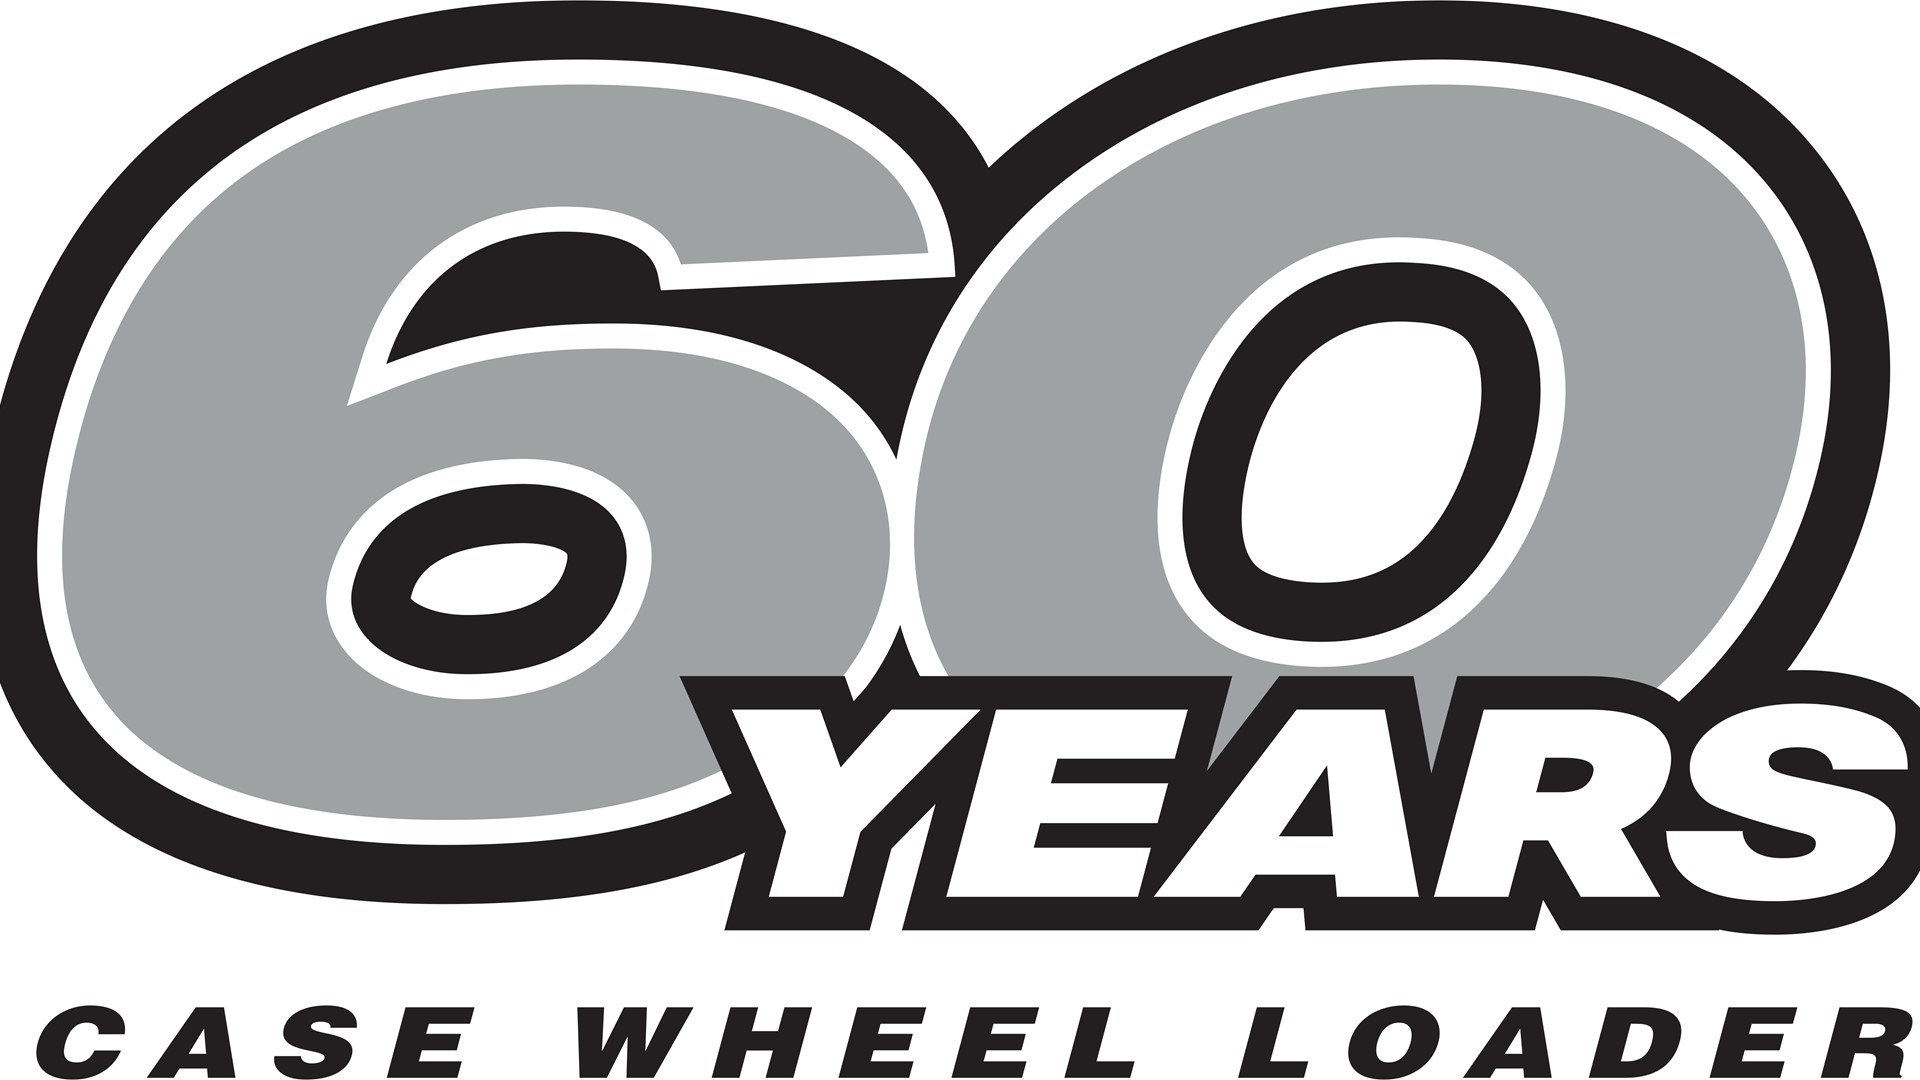 CASE Celebrates 60 Years of Wheel Loader Manufacturing in 2018